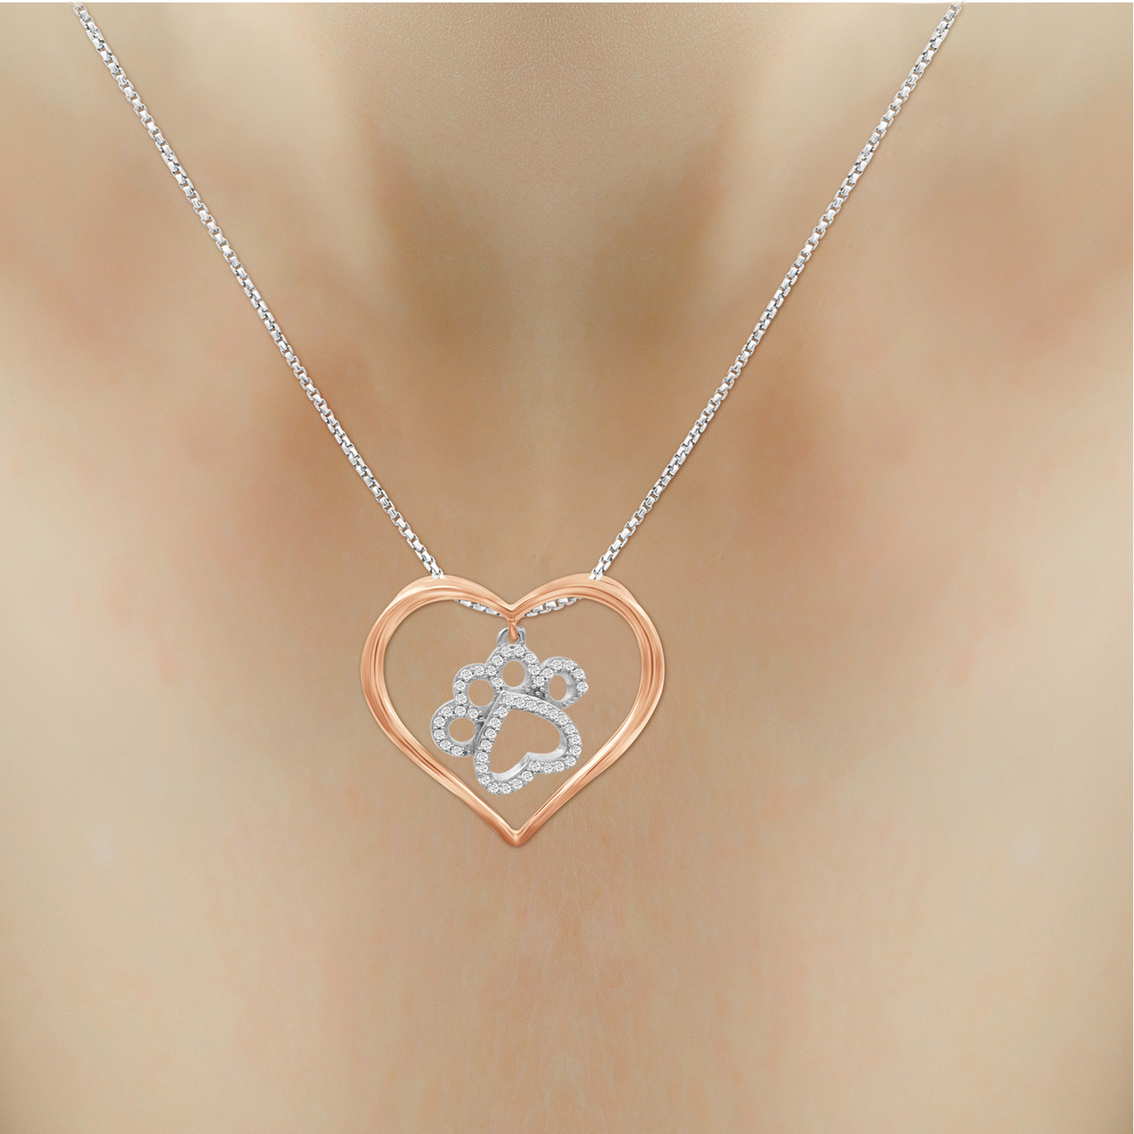 Animal's Rock Sterling Silver & 14K Plated 1/7 Ctw Diamond Swing Paw Heart Pendant - Image 4 of 4